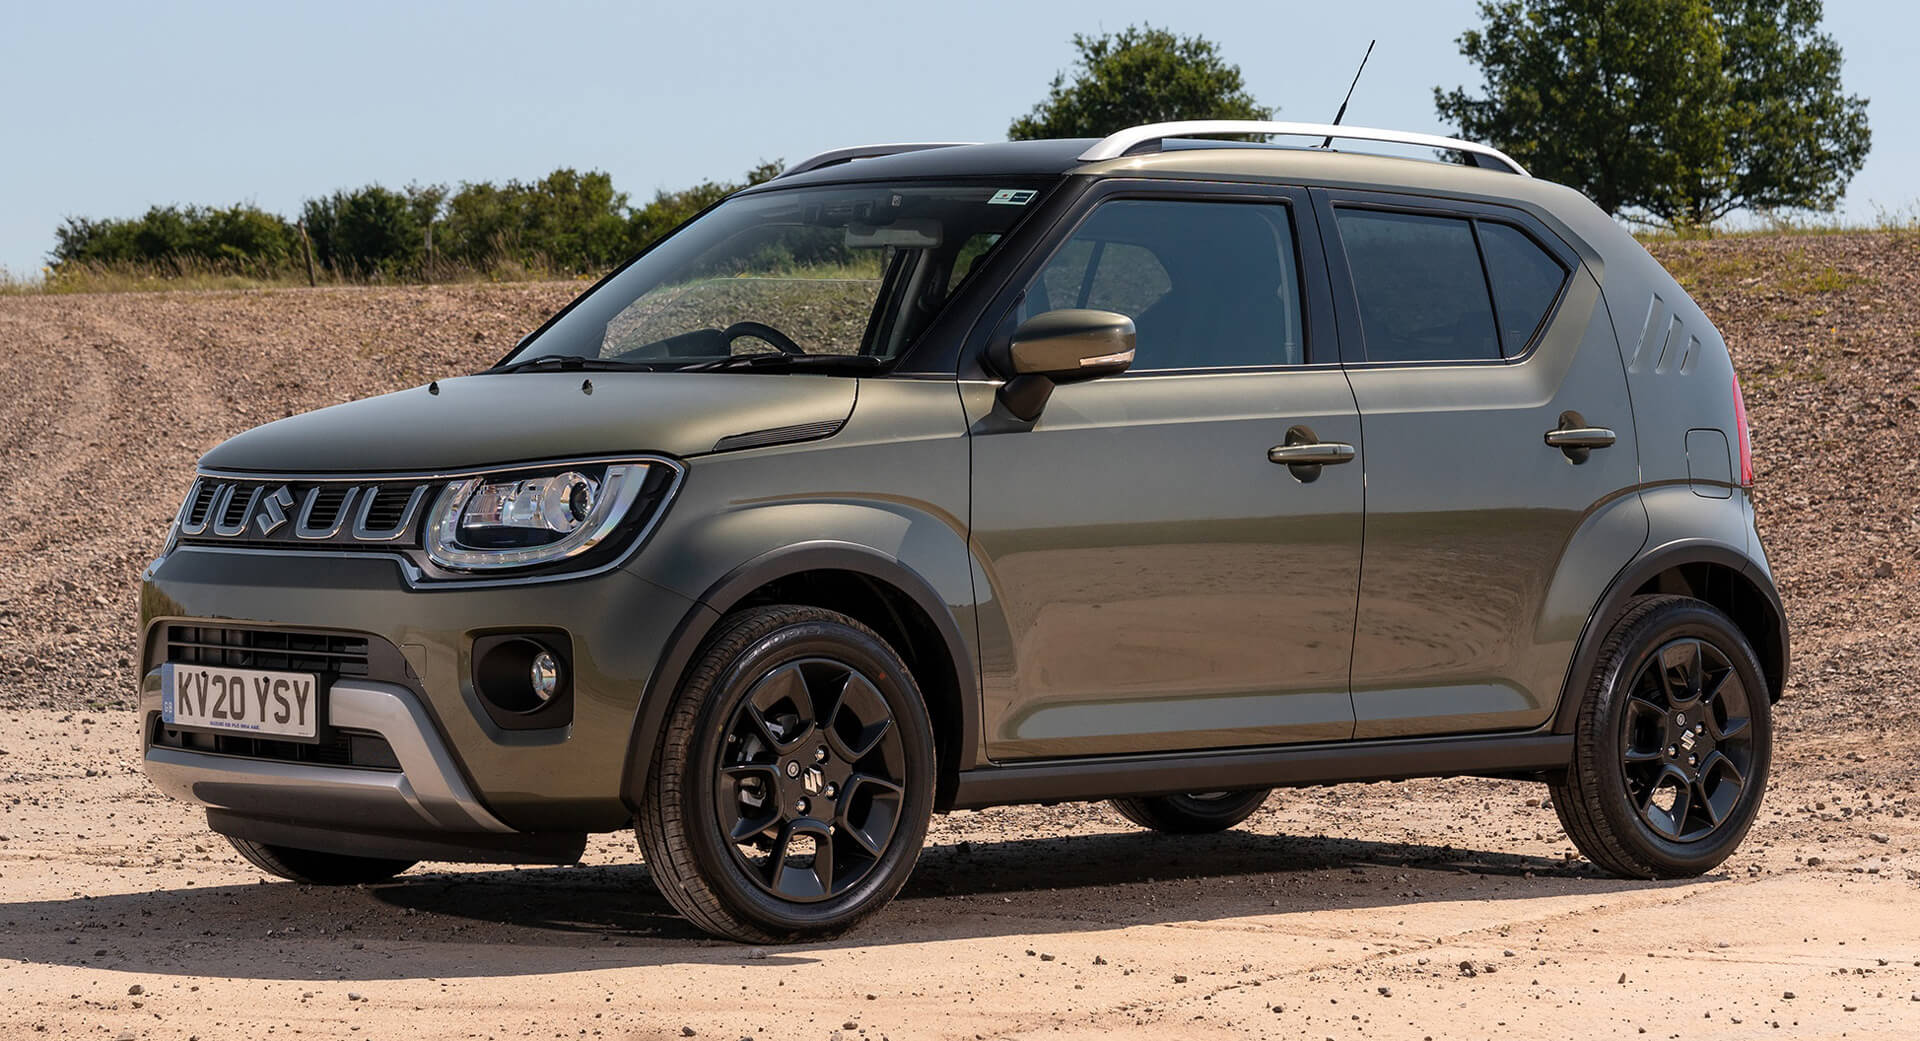 2021 Suzuki Ignis Goes On Sale In The UK, Is A Lot Of City Car For £13,999